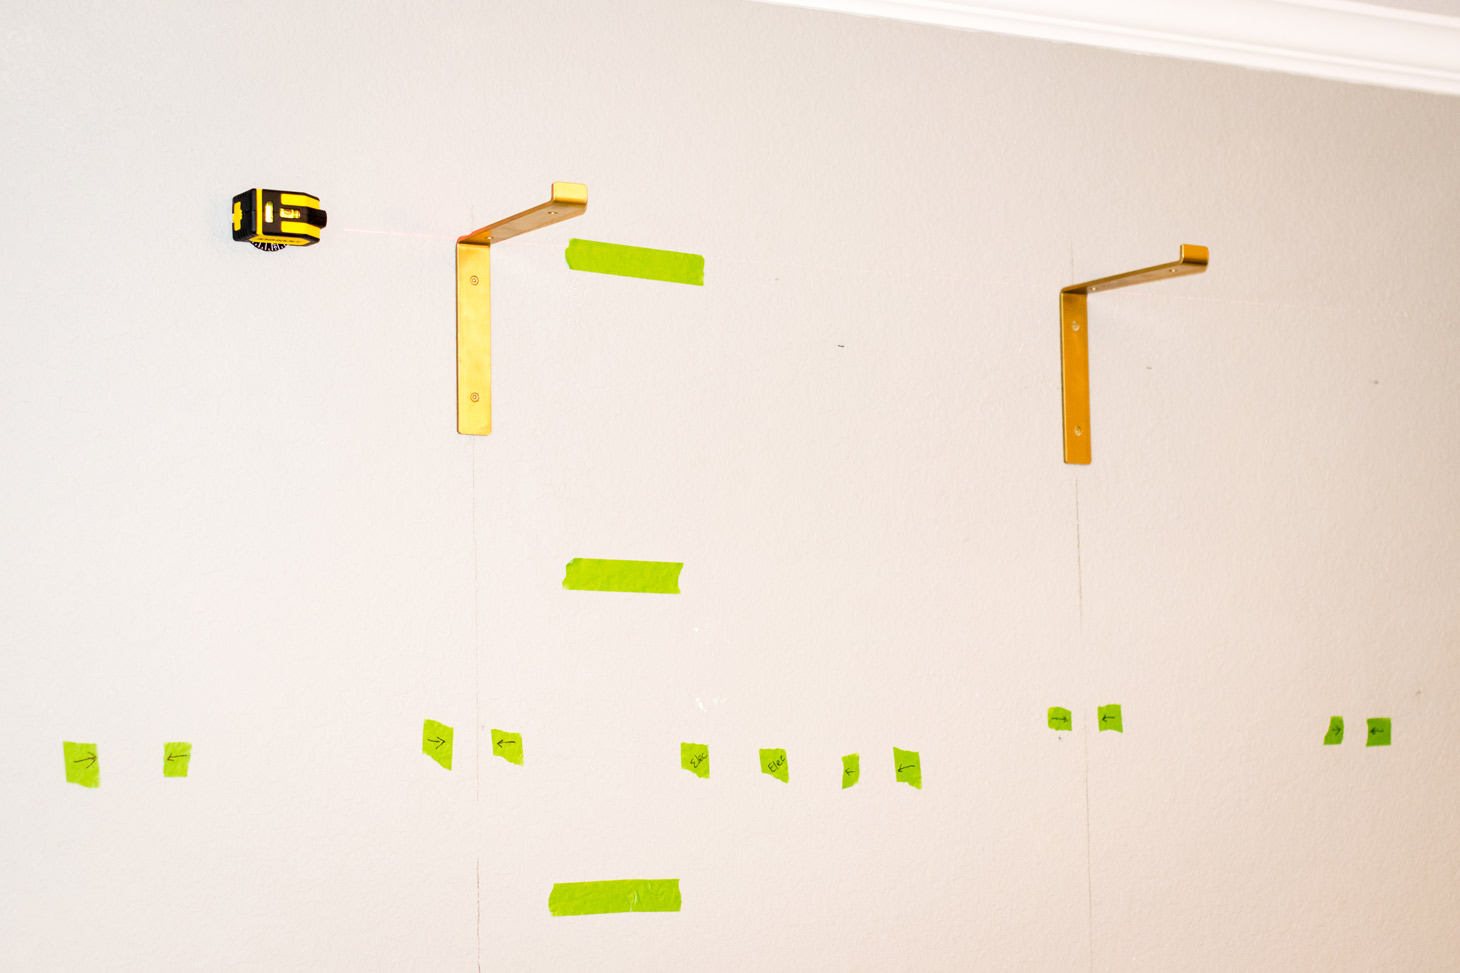 installing shelf brackets by finding studs in the wall and using a laser level